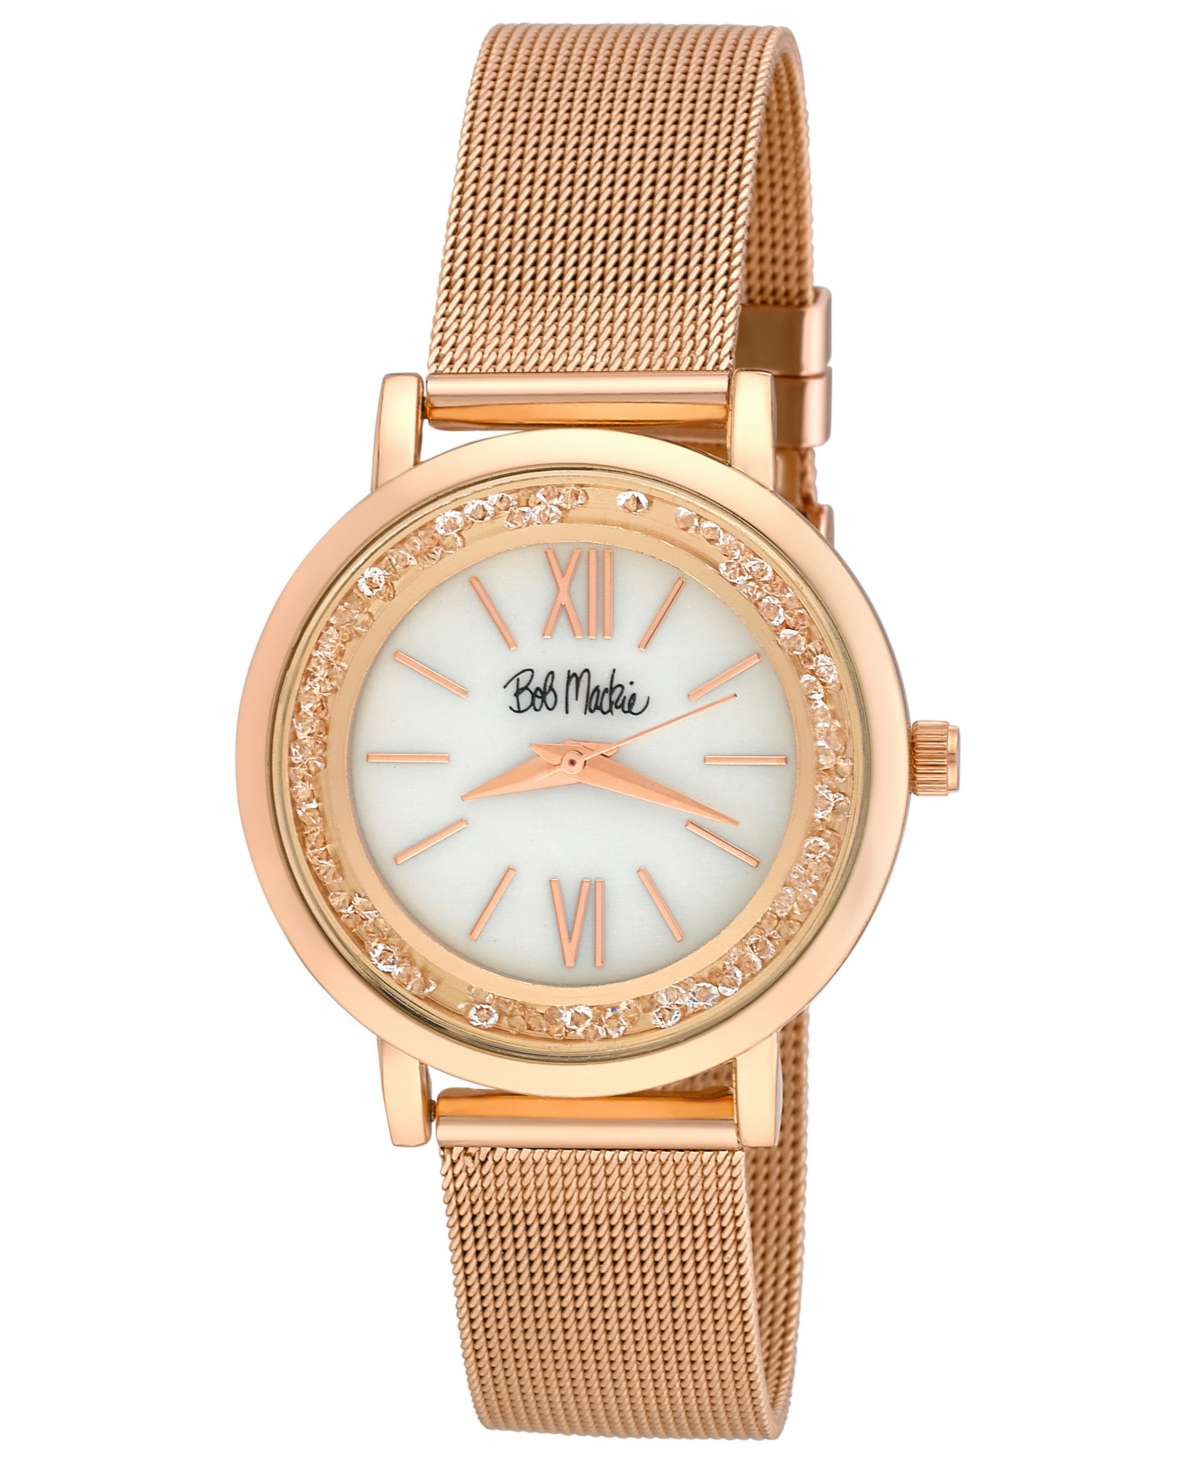 Unisex Rolling Stone Rose Gold-Tone Alloy Mesh Band Watch 34mm - Rose Gold-Tone